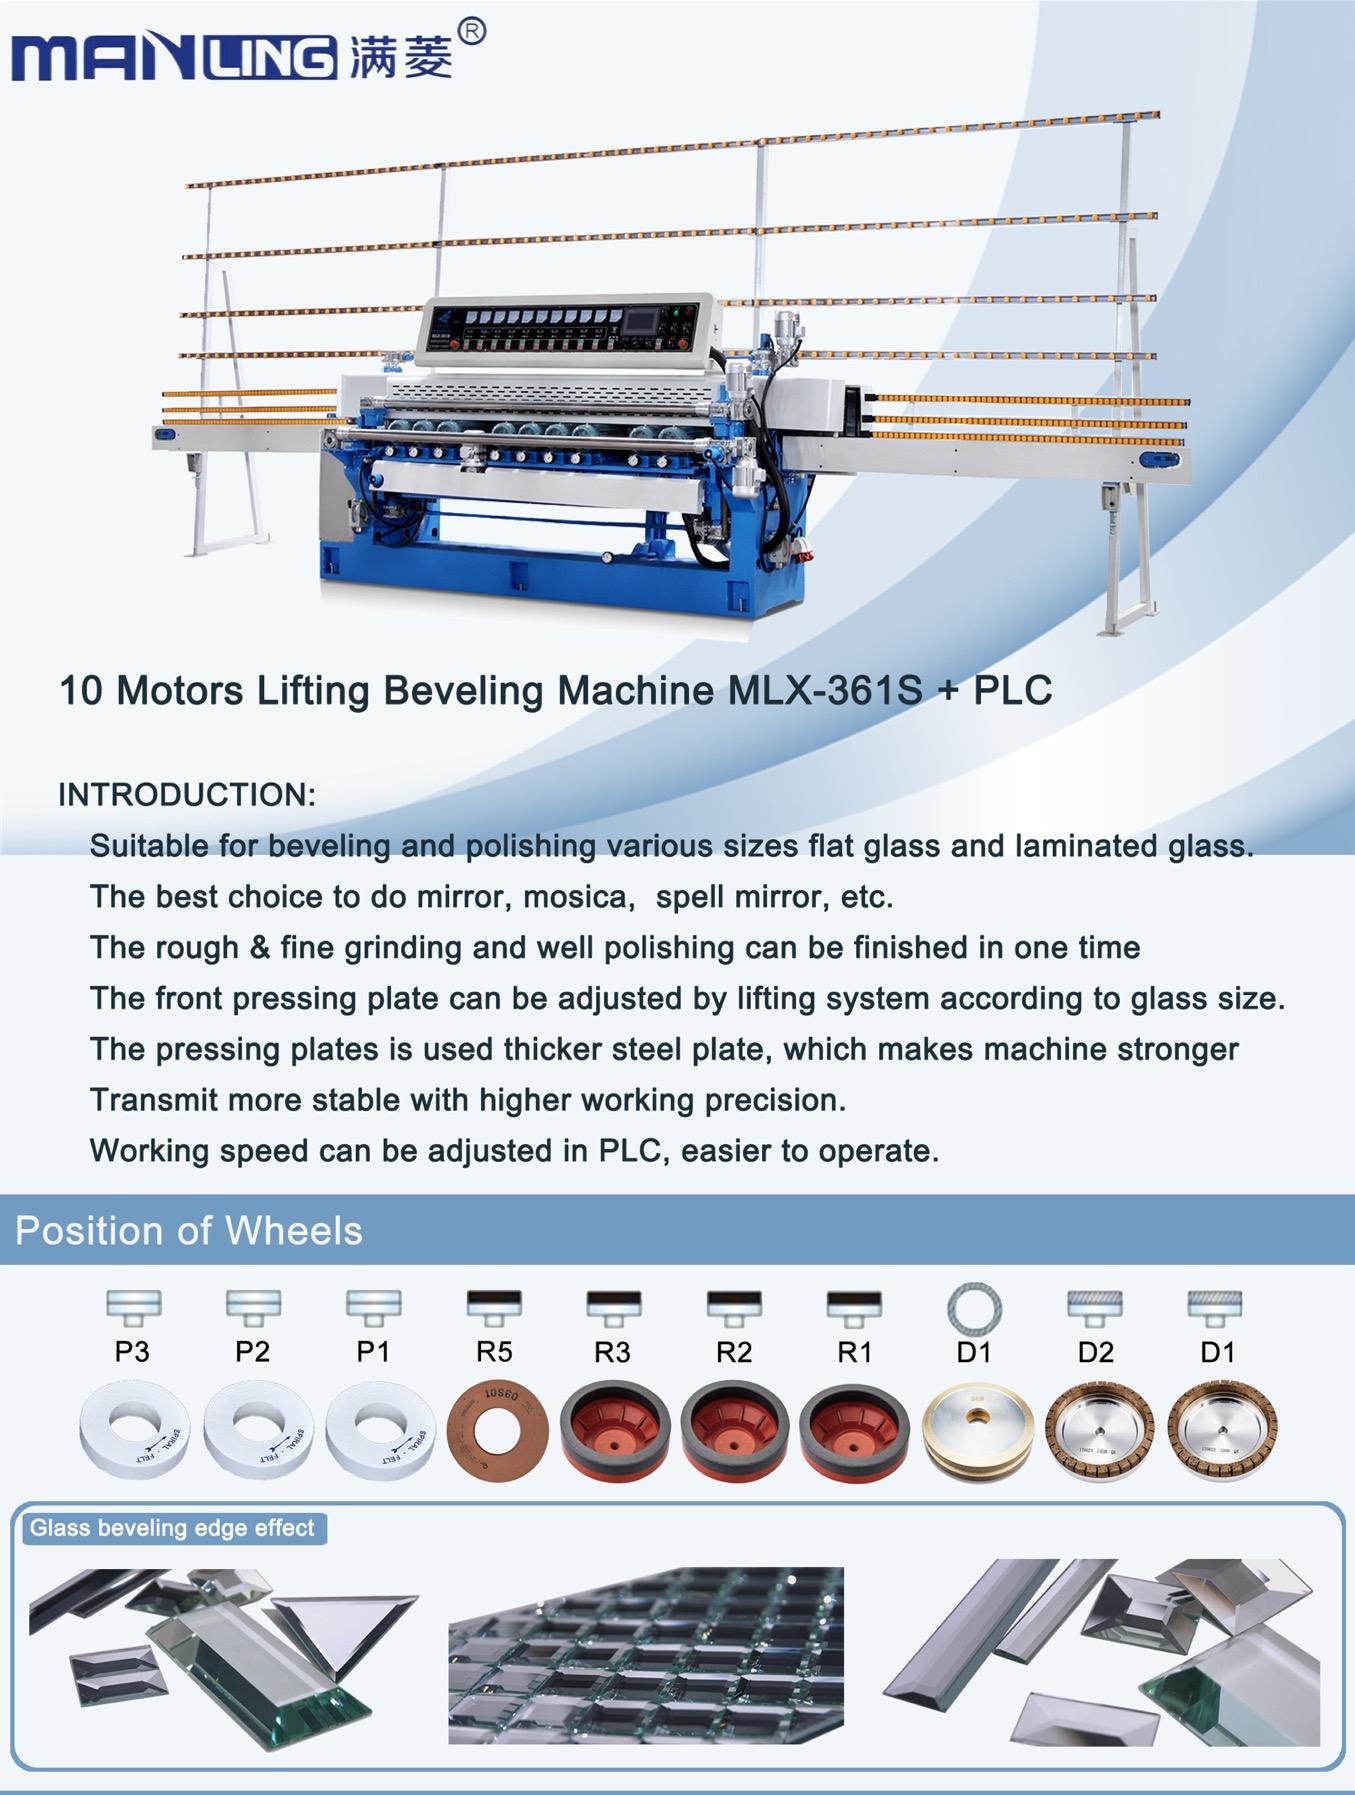 Manling Good Quality And Worthy Price Straight Line Glass Beveling Machine